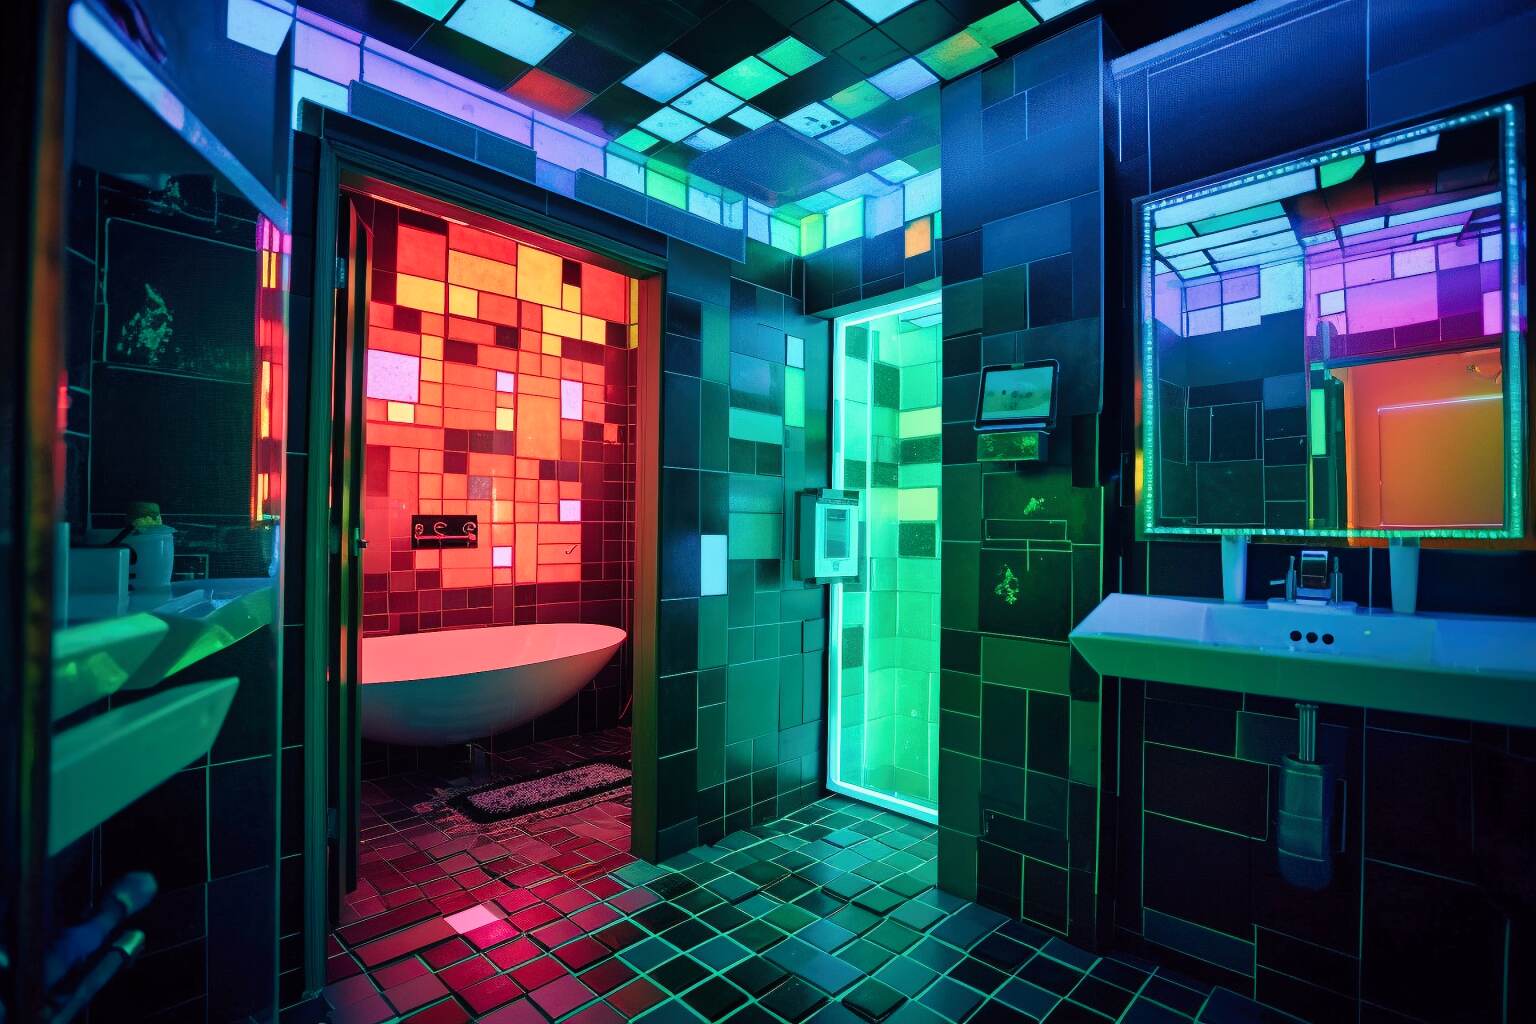 A Cyberpunk Bathroom With Color Changing Tiles